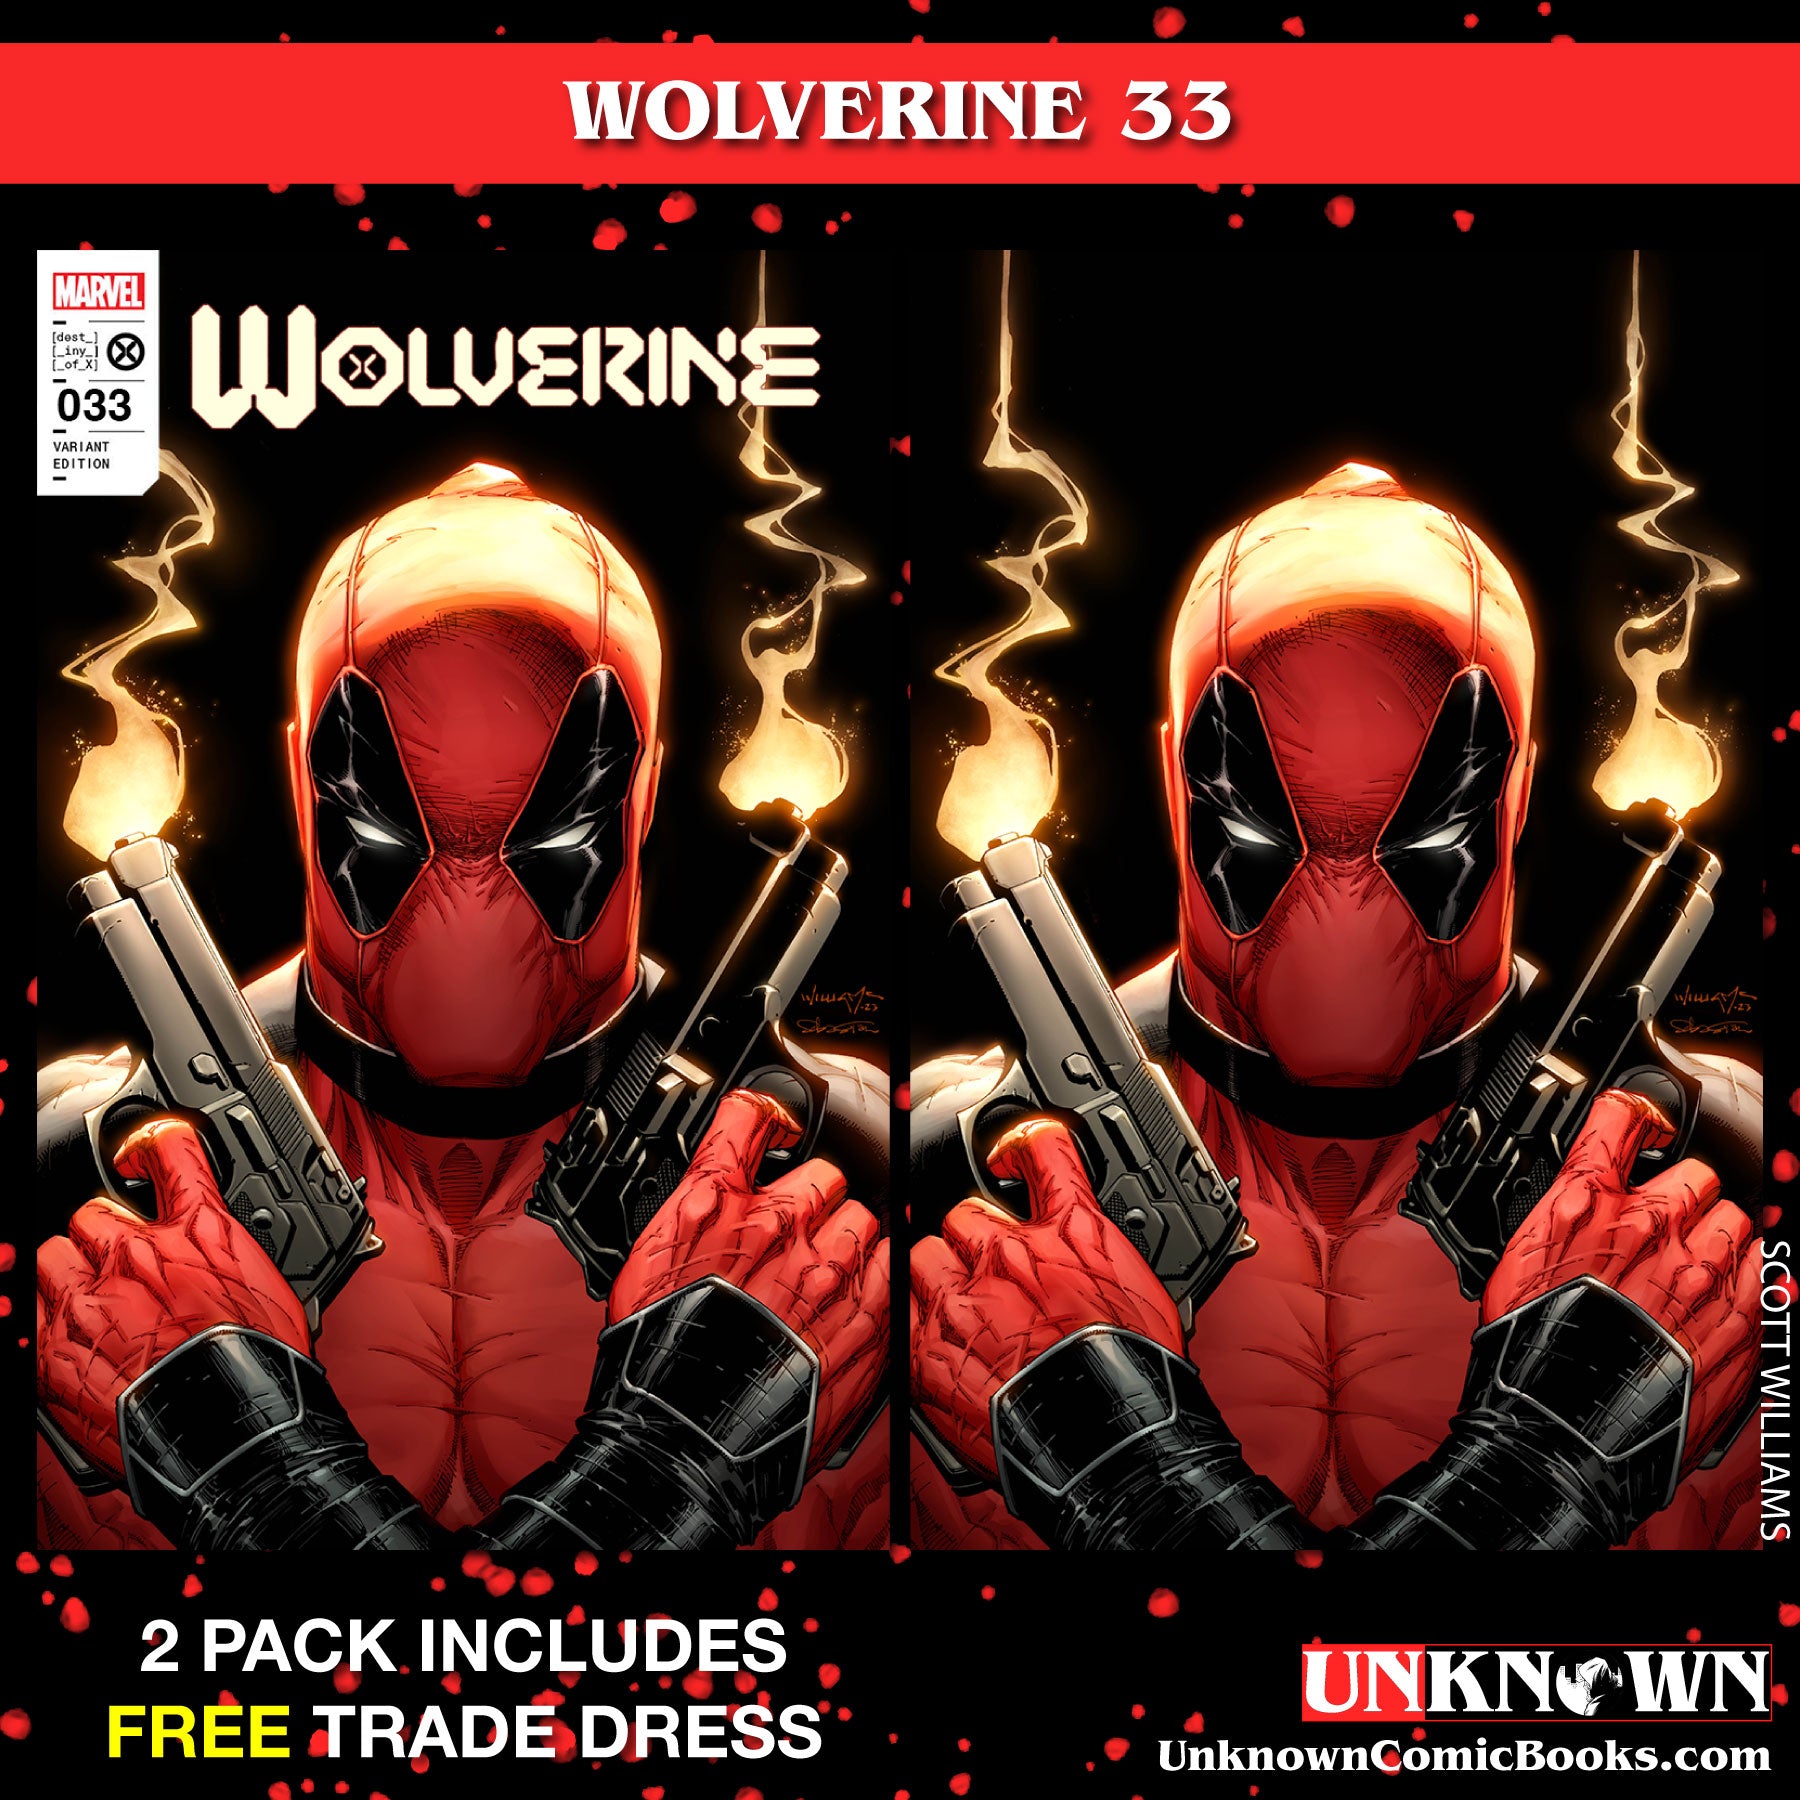 [2 PACK] **FREE TRADE DRESS** WOLVERINE #33 UNKNOWN COMICS SCOTT WILLIAMS EXCLUSIVE ICON VAR (05/10/2023)